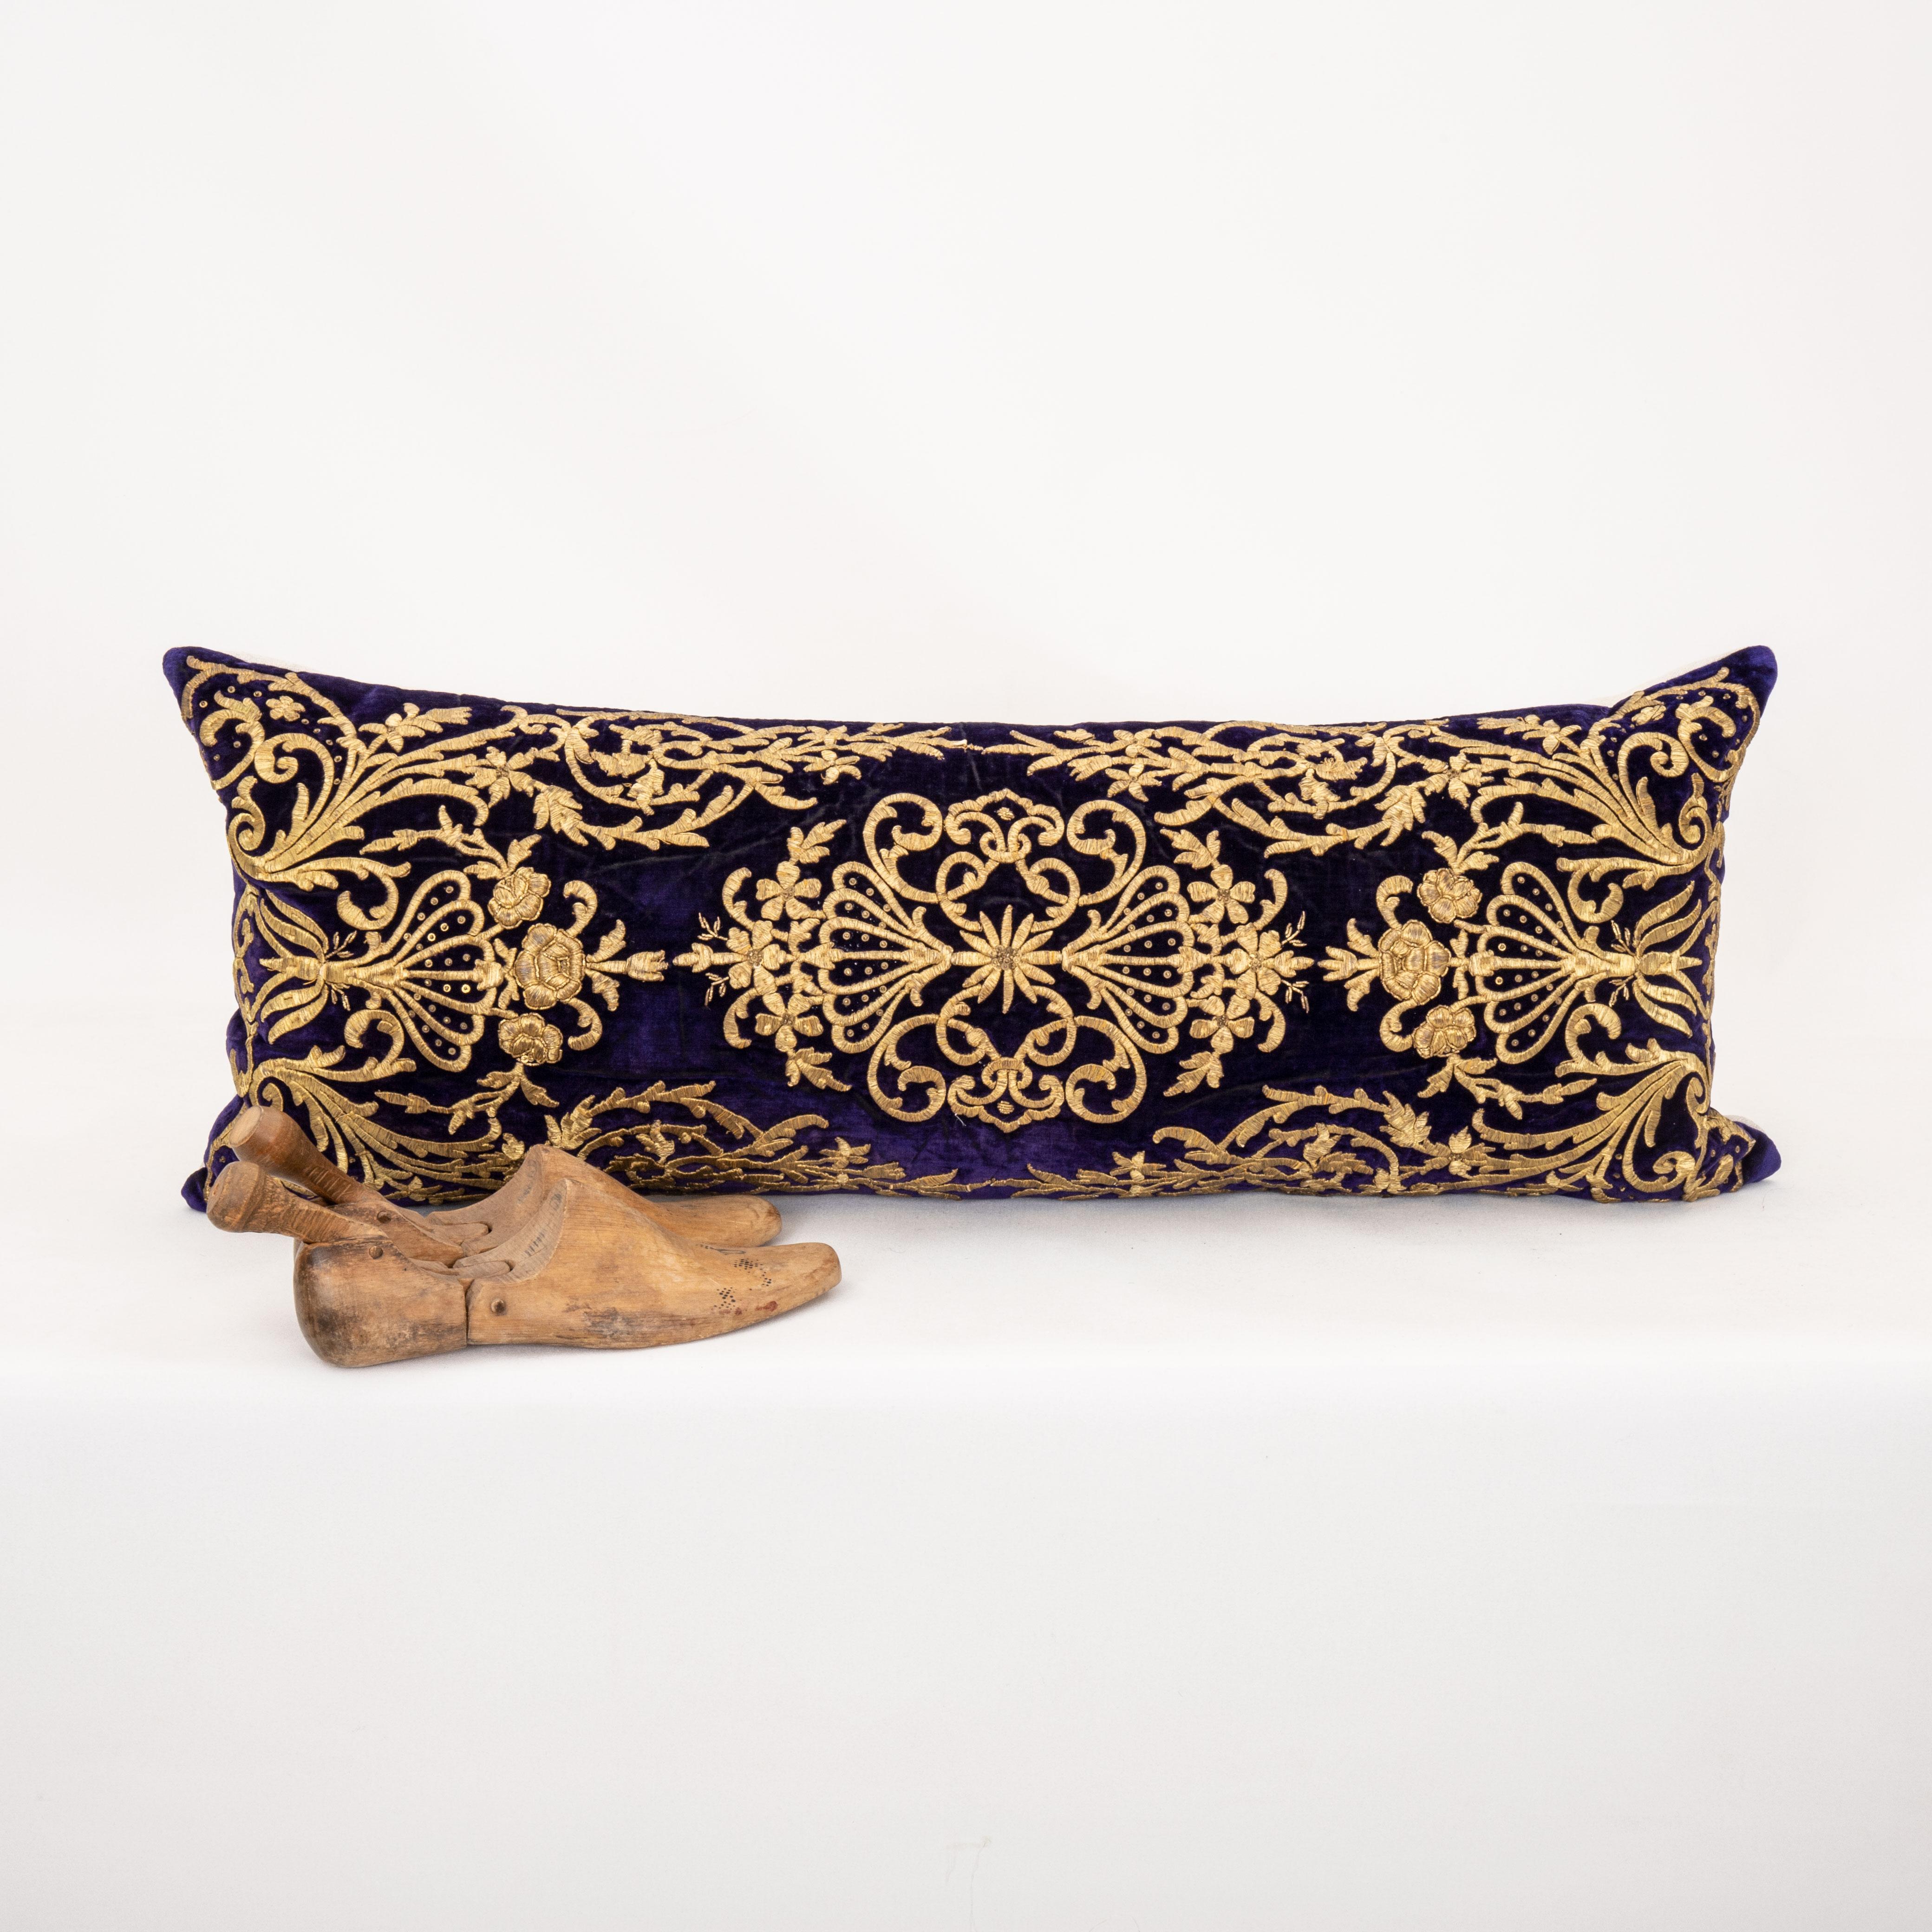 Silk Ottoman / Turkish Pillow Cover in Sarma Technique, late 19th / Early 20th C. For Sale